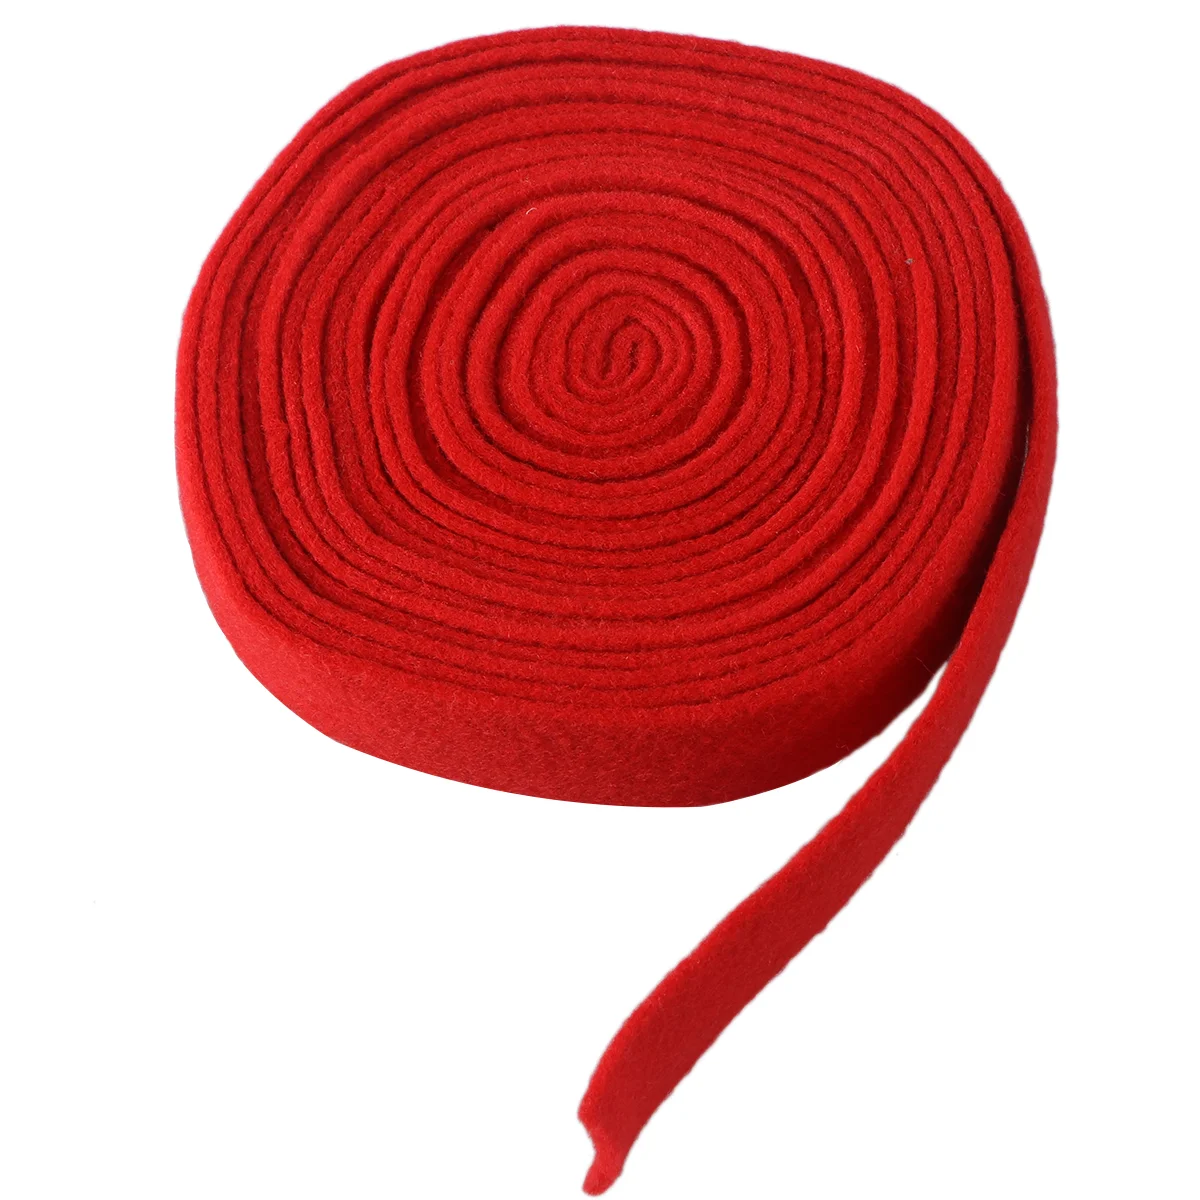 

Ribbon Christmas Felt Tree Wool Ribbons Fabric Crafts Craft Wired Red Inch Decorations Decoration Wrapping Wreath Diy Decors